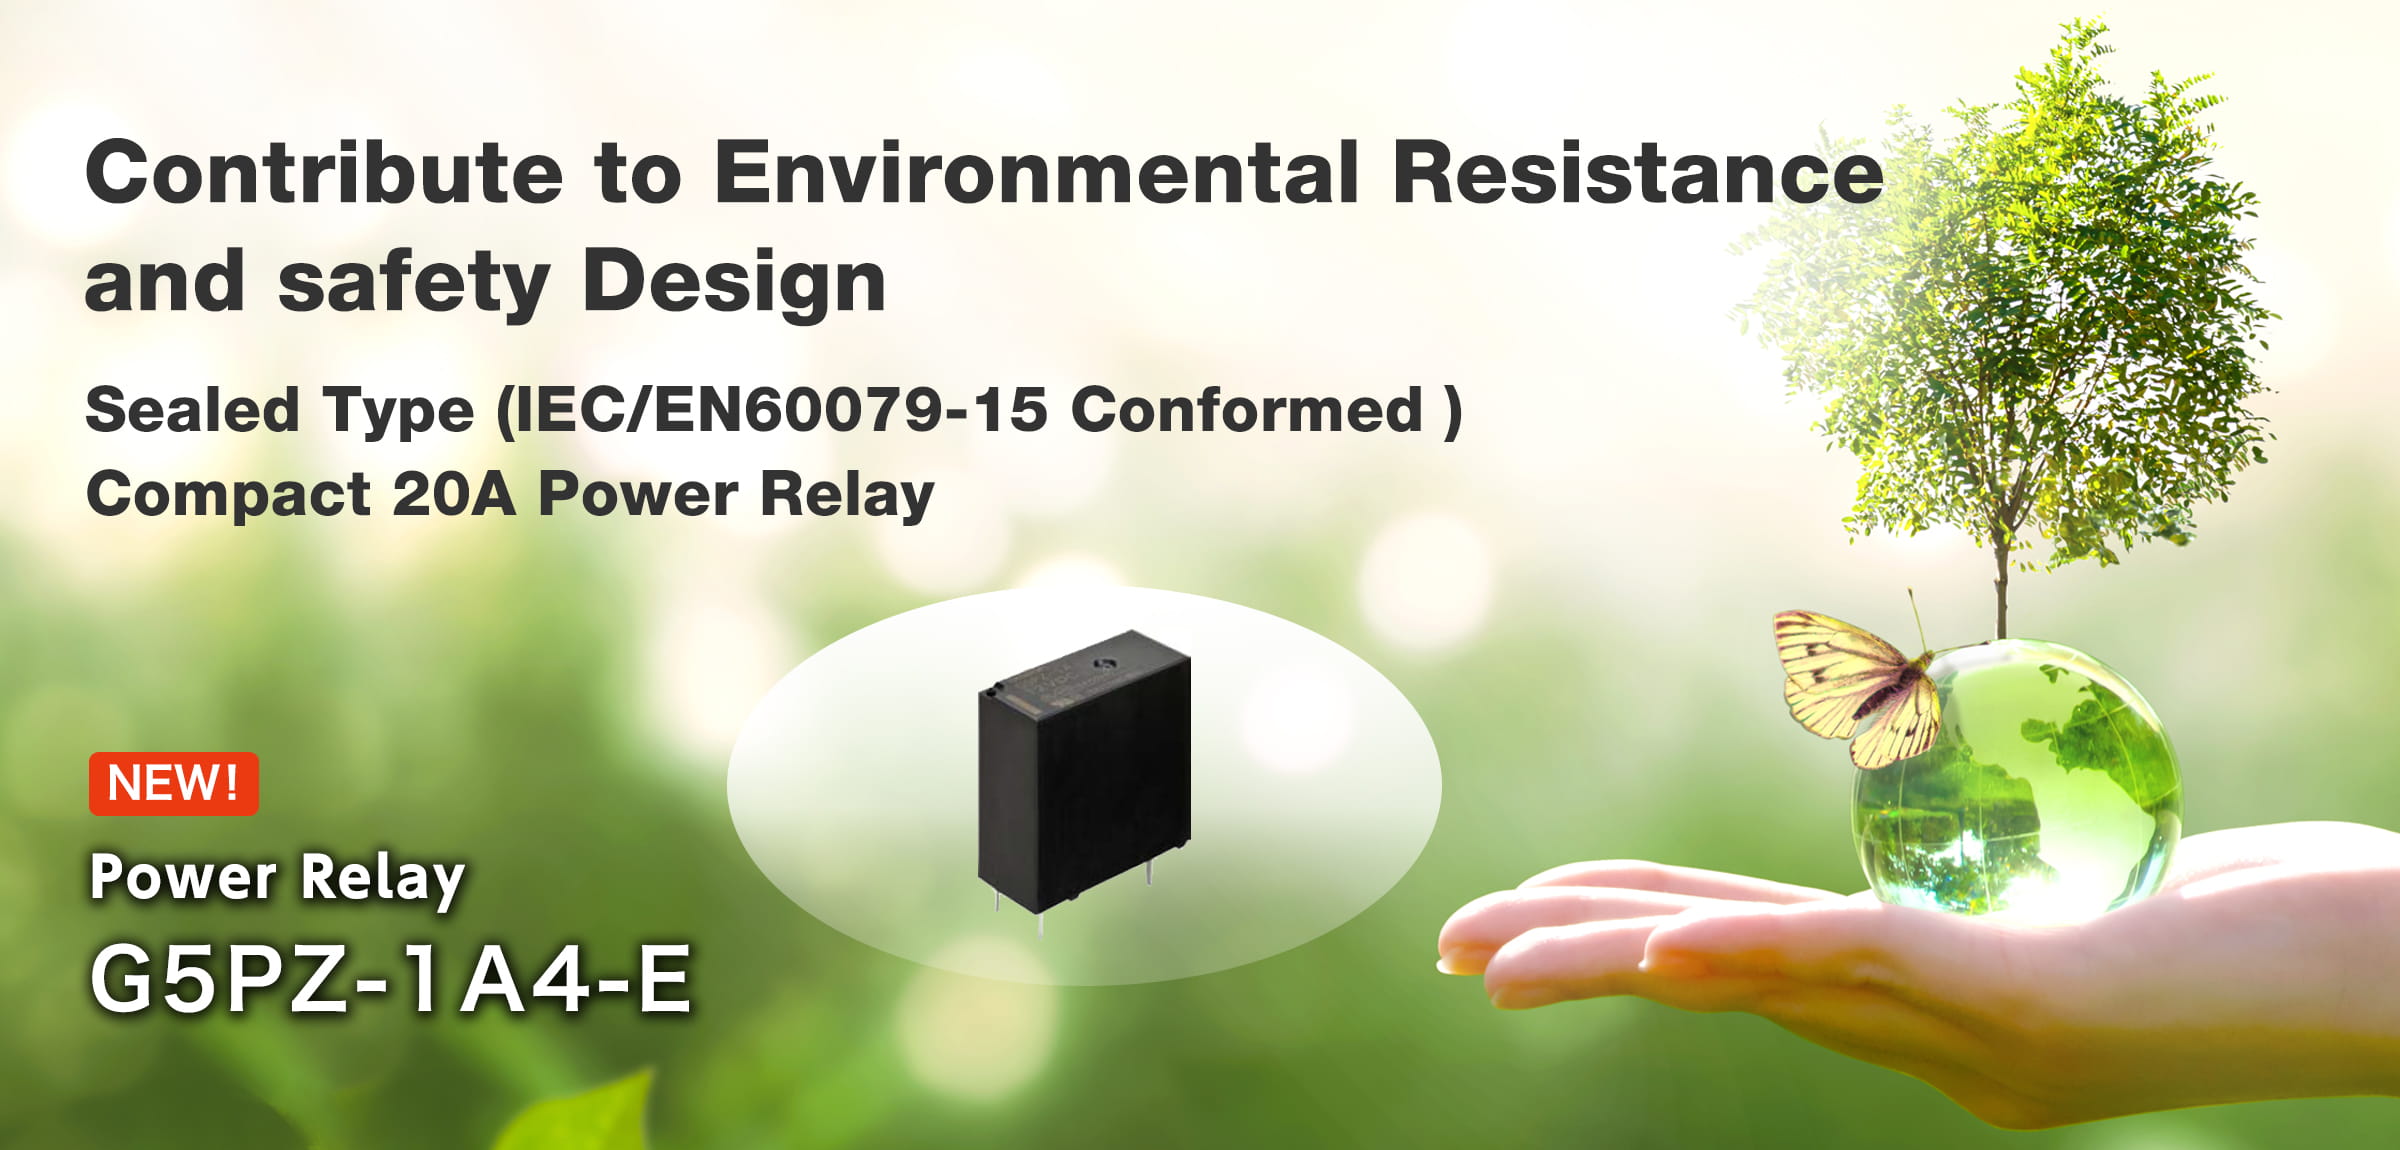 Contribute to Environmental Resistance and Safety Design. Sealed Type (IEC/EN60079-15 Conformed ) Compact 20A Power Relay G5PZ-1A4-E